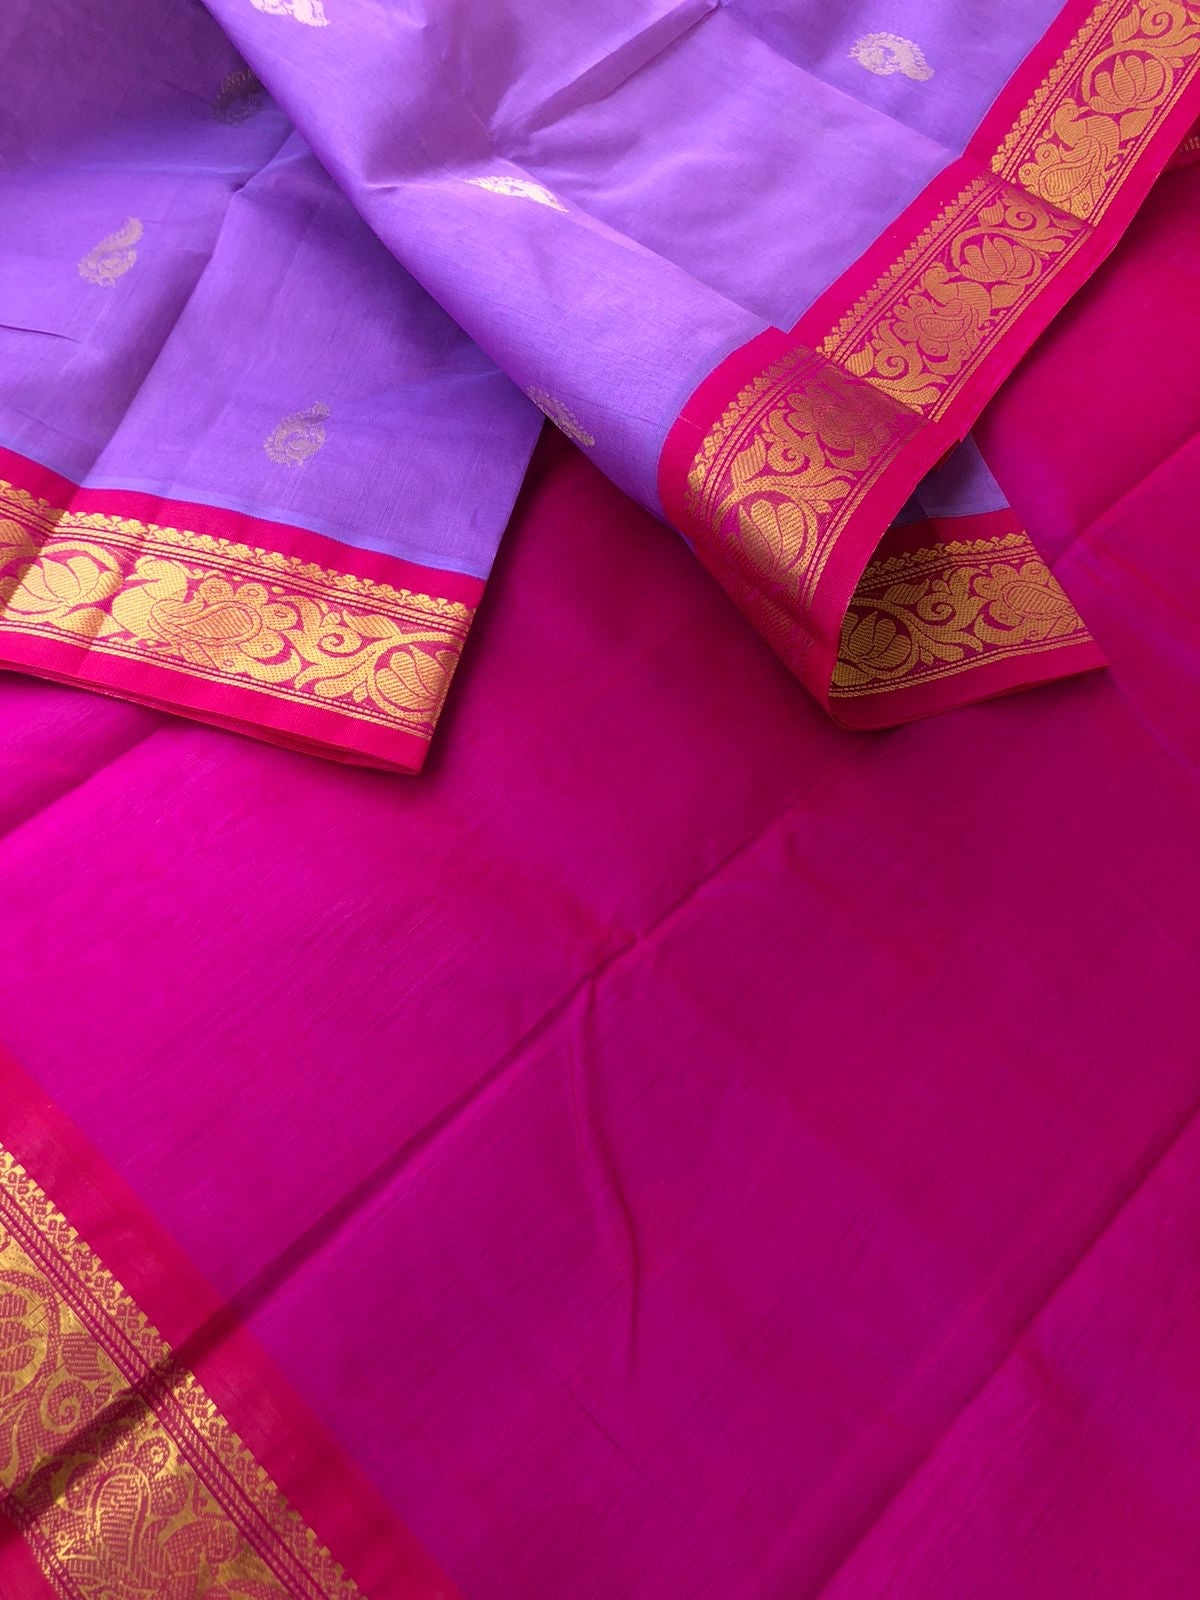 Bliss of Korvai Silk Cottons - December lavenders